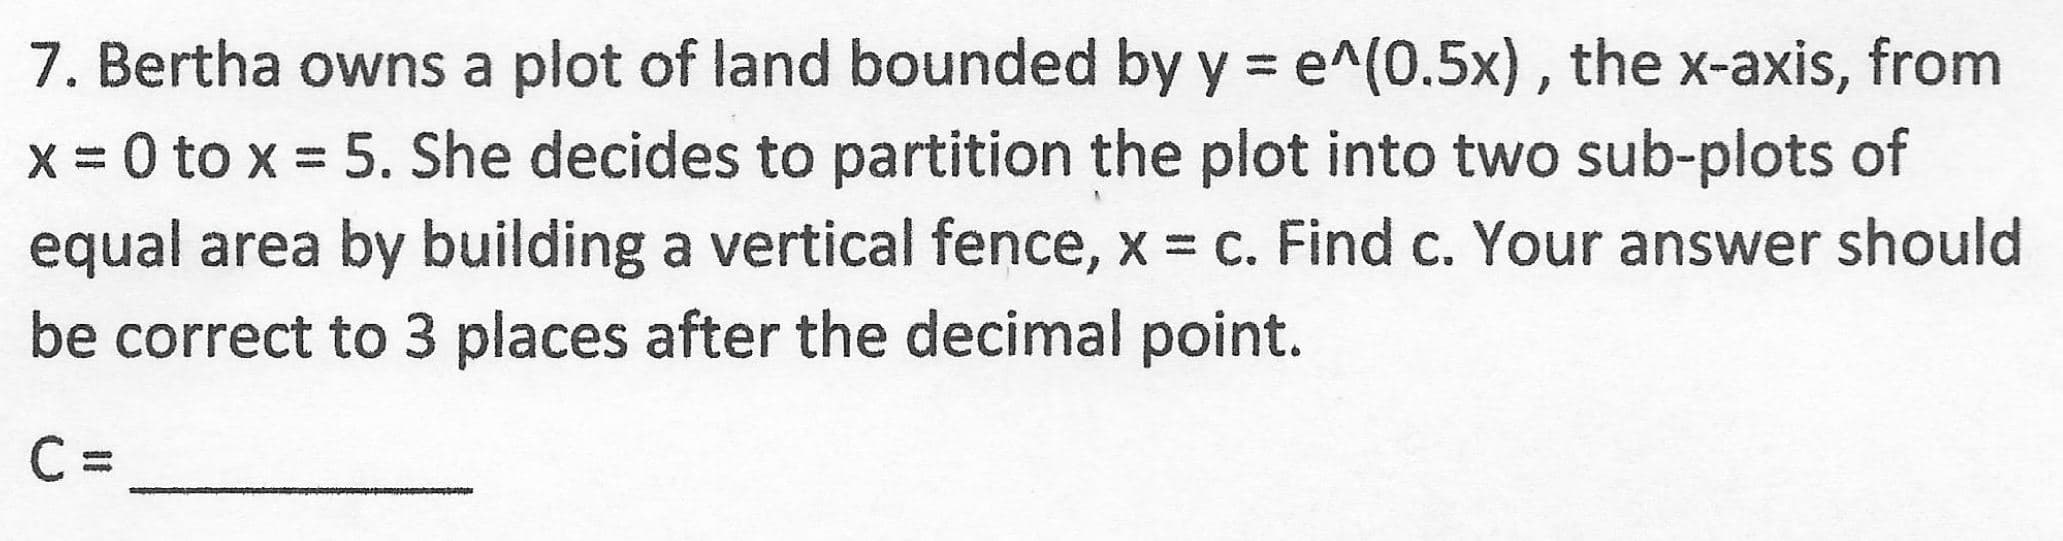 7. Bertha owns a plot of land bounded by y = e^(0.5x), the x-axis, from
x = 0 to x = 5. She decides to partition the plot into two sub-plots of
equal area by building a vertical fence, x = c. Find c. Your answer should
be correct to 3 places after the decimal point.
%3D
